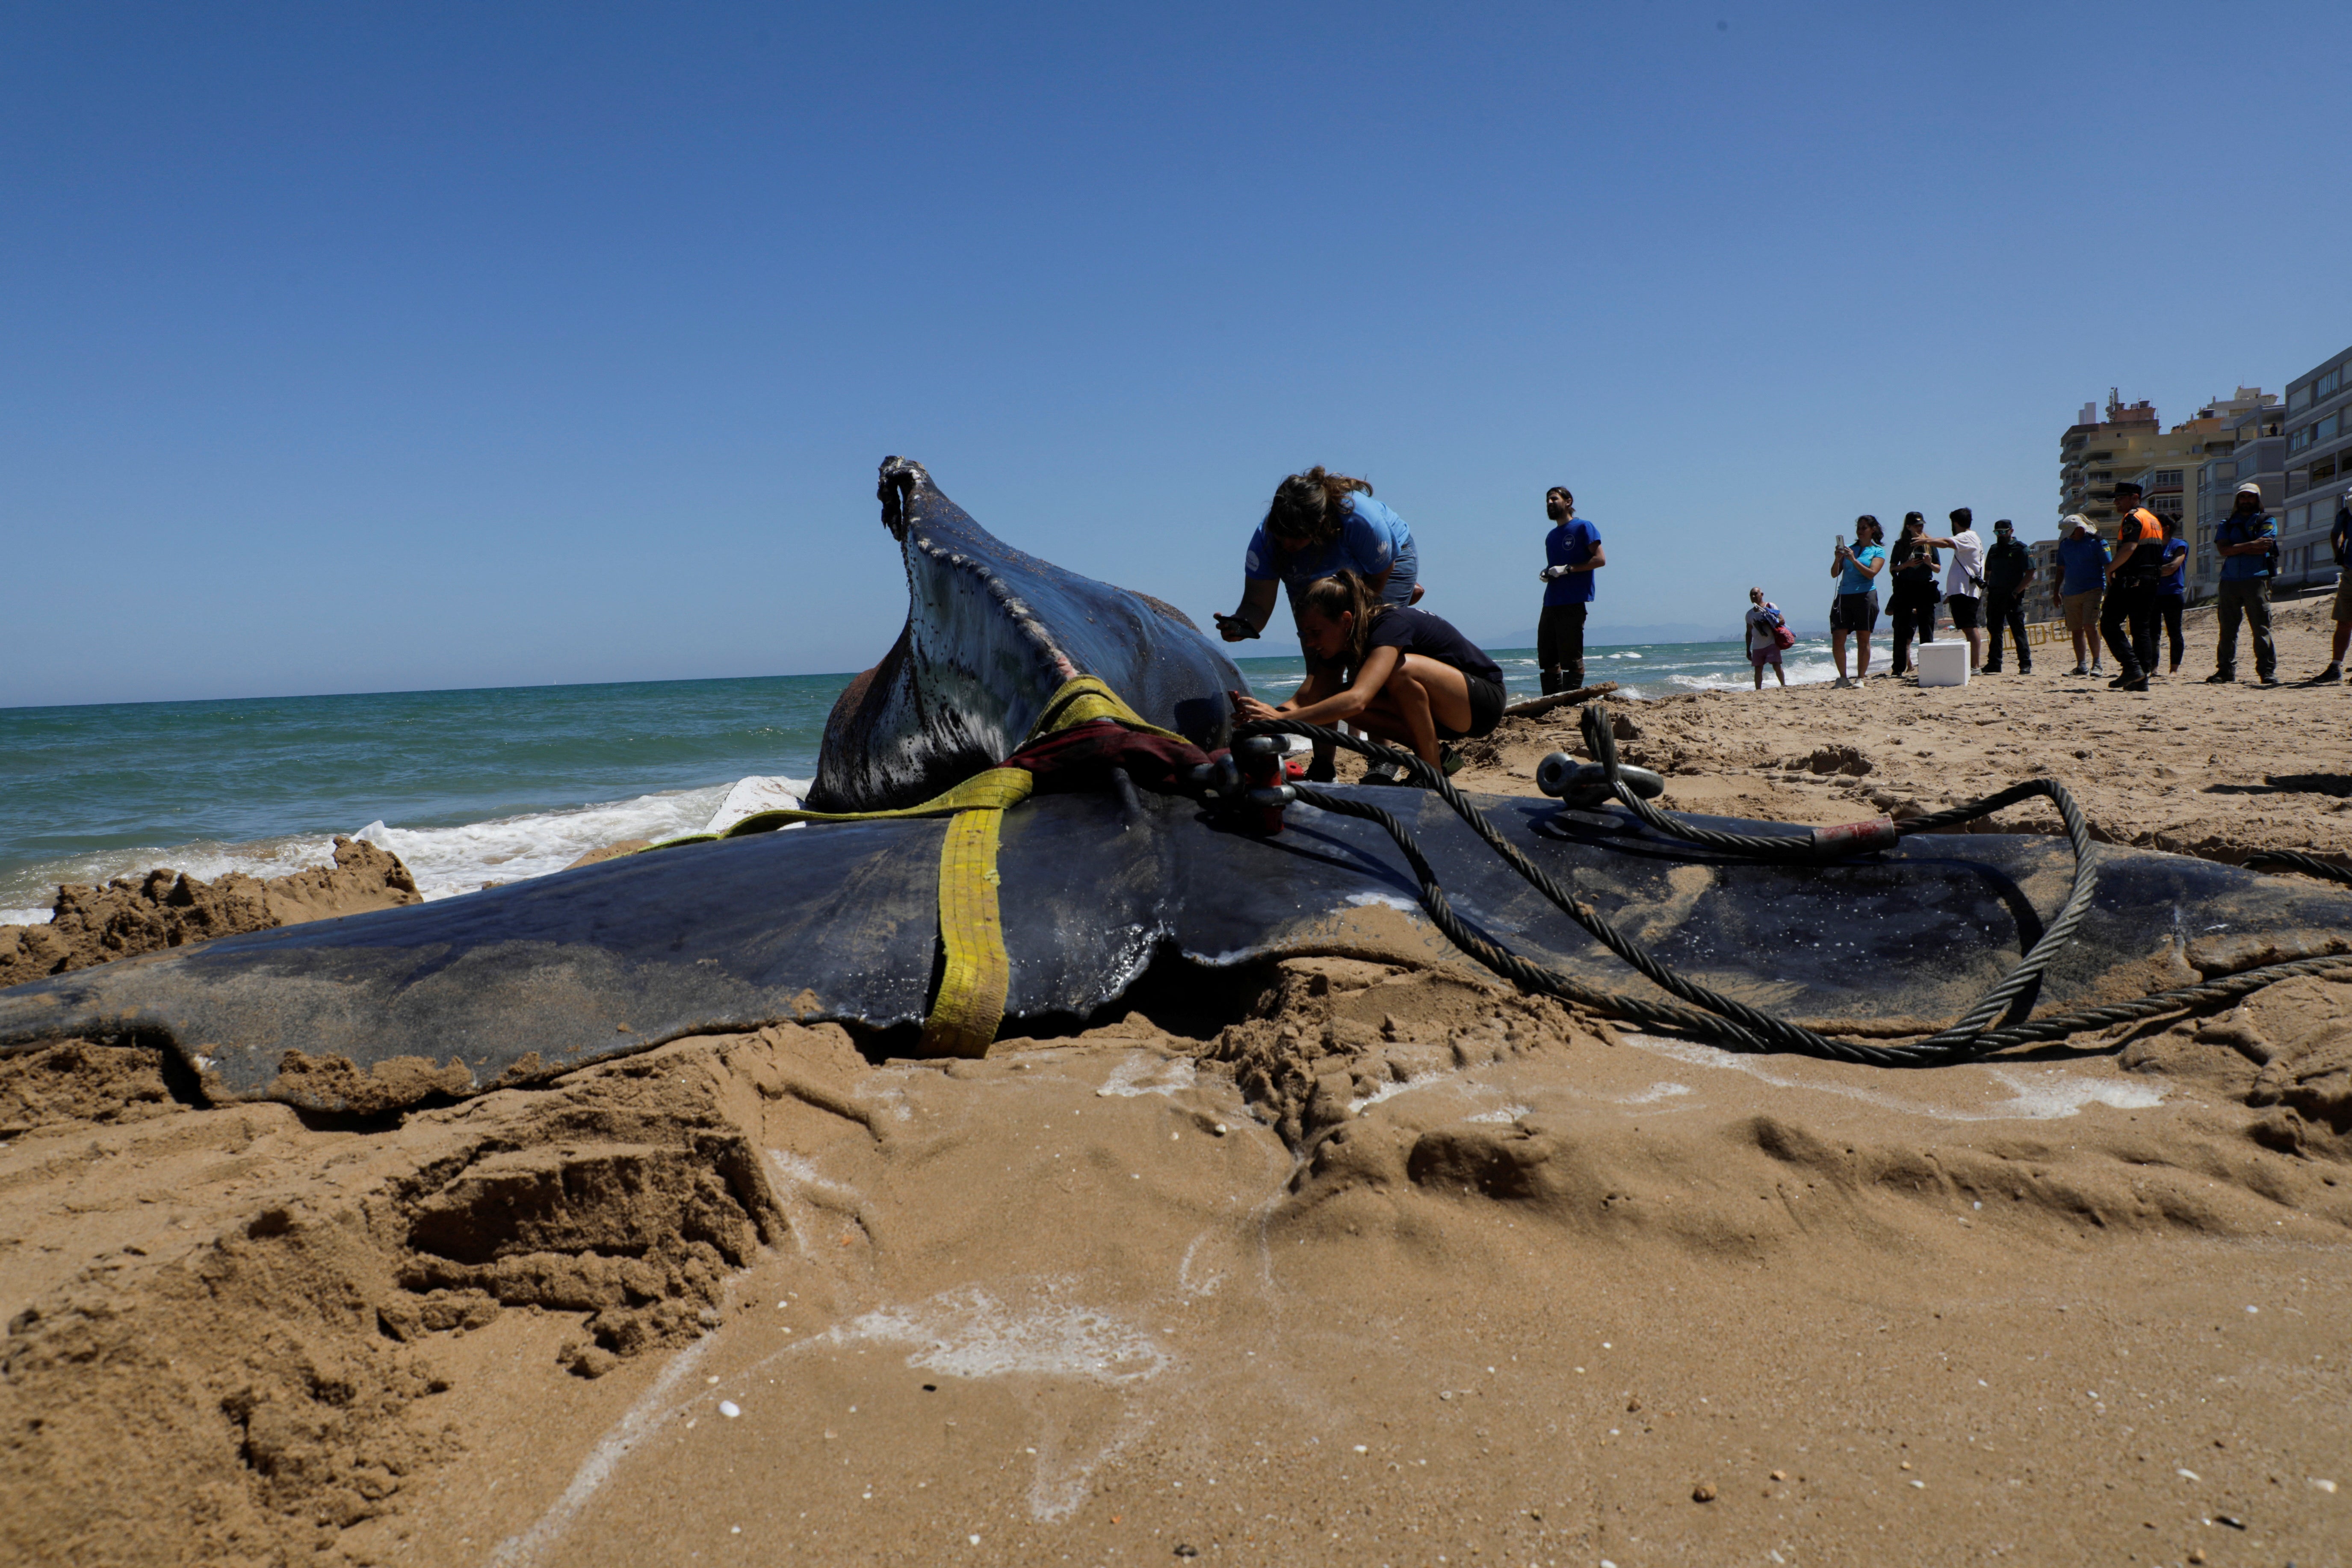 Specialists from the Oceanography Foundation believed it would not survive if returned to the sea